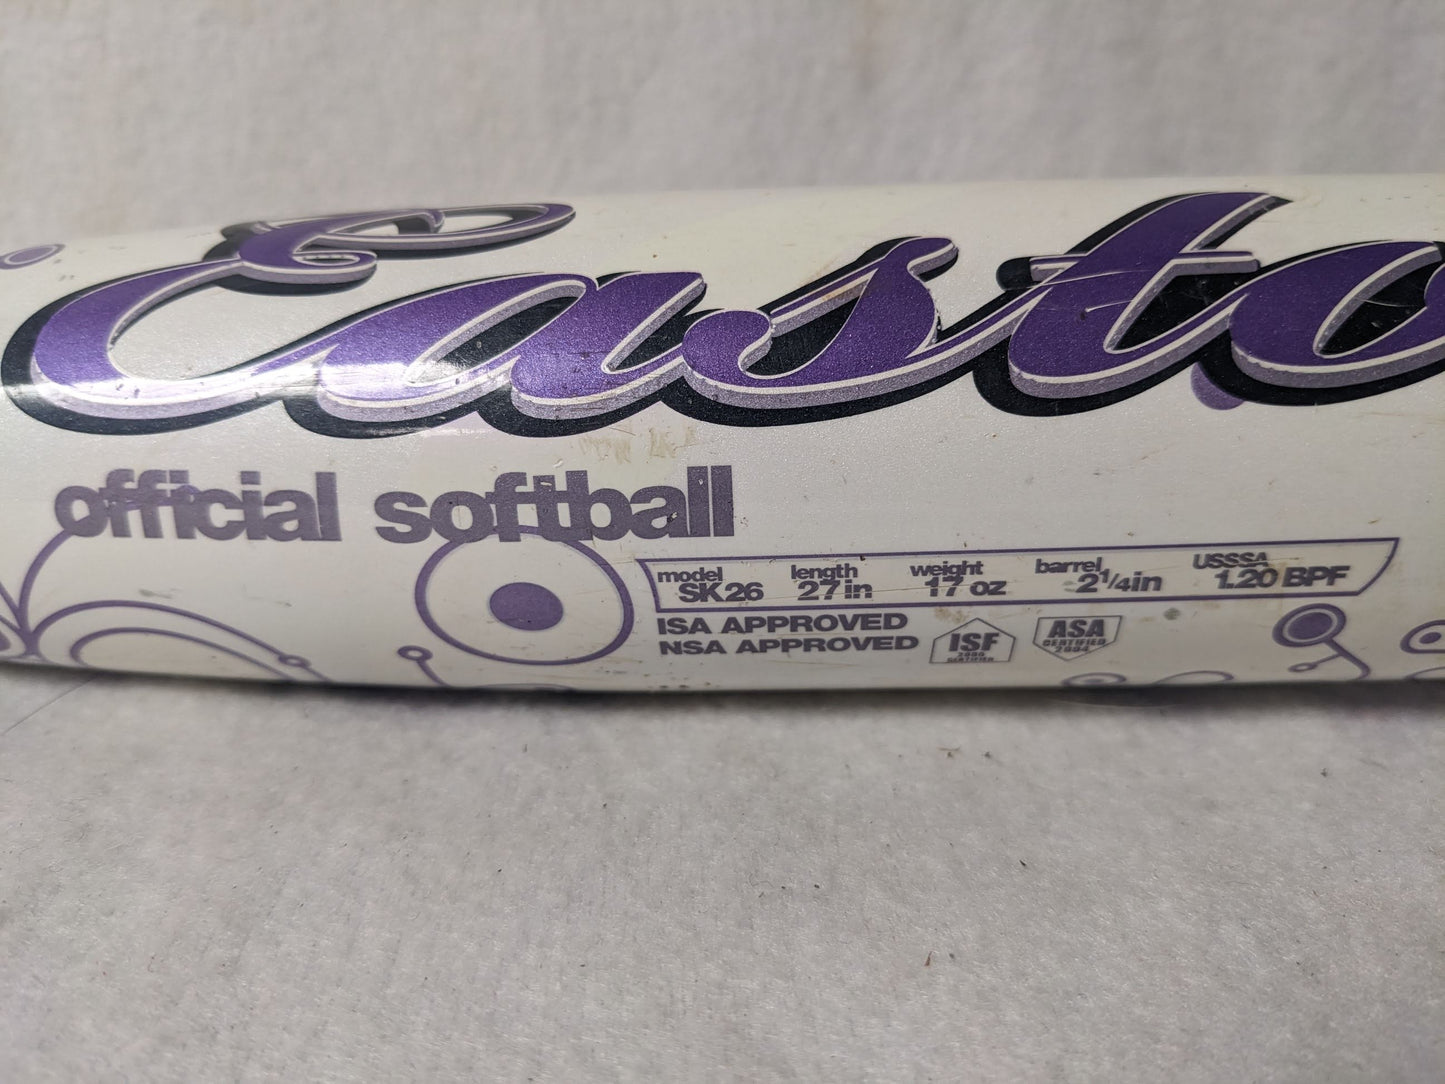 Easton Fastpitch Girl's Softball Bat Size 27 In 17 Oz Color White Condition Used ISA NSA ISF ASA